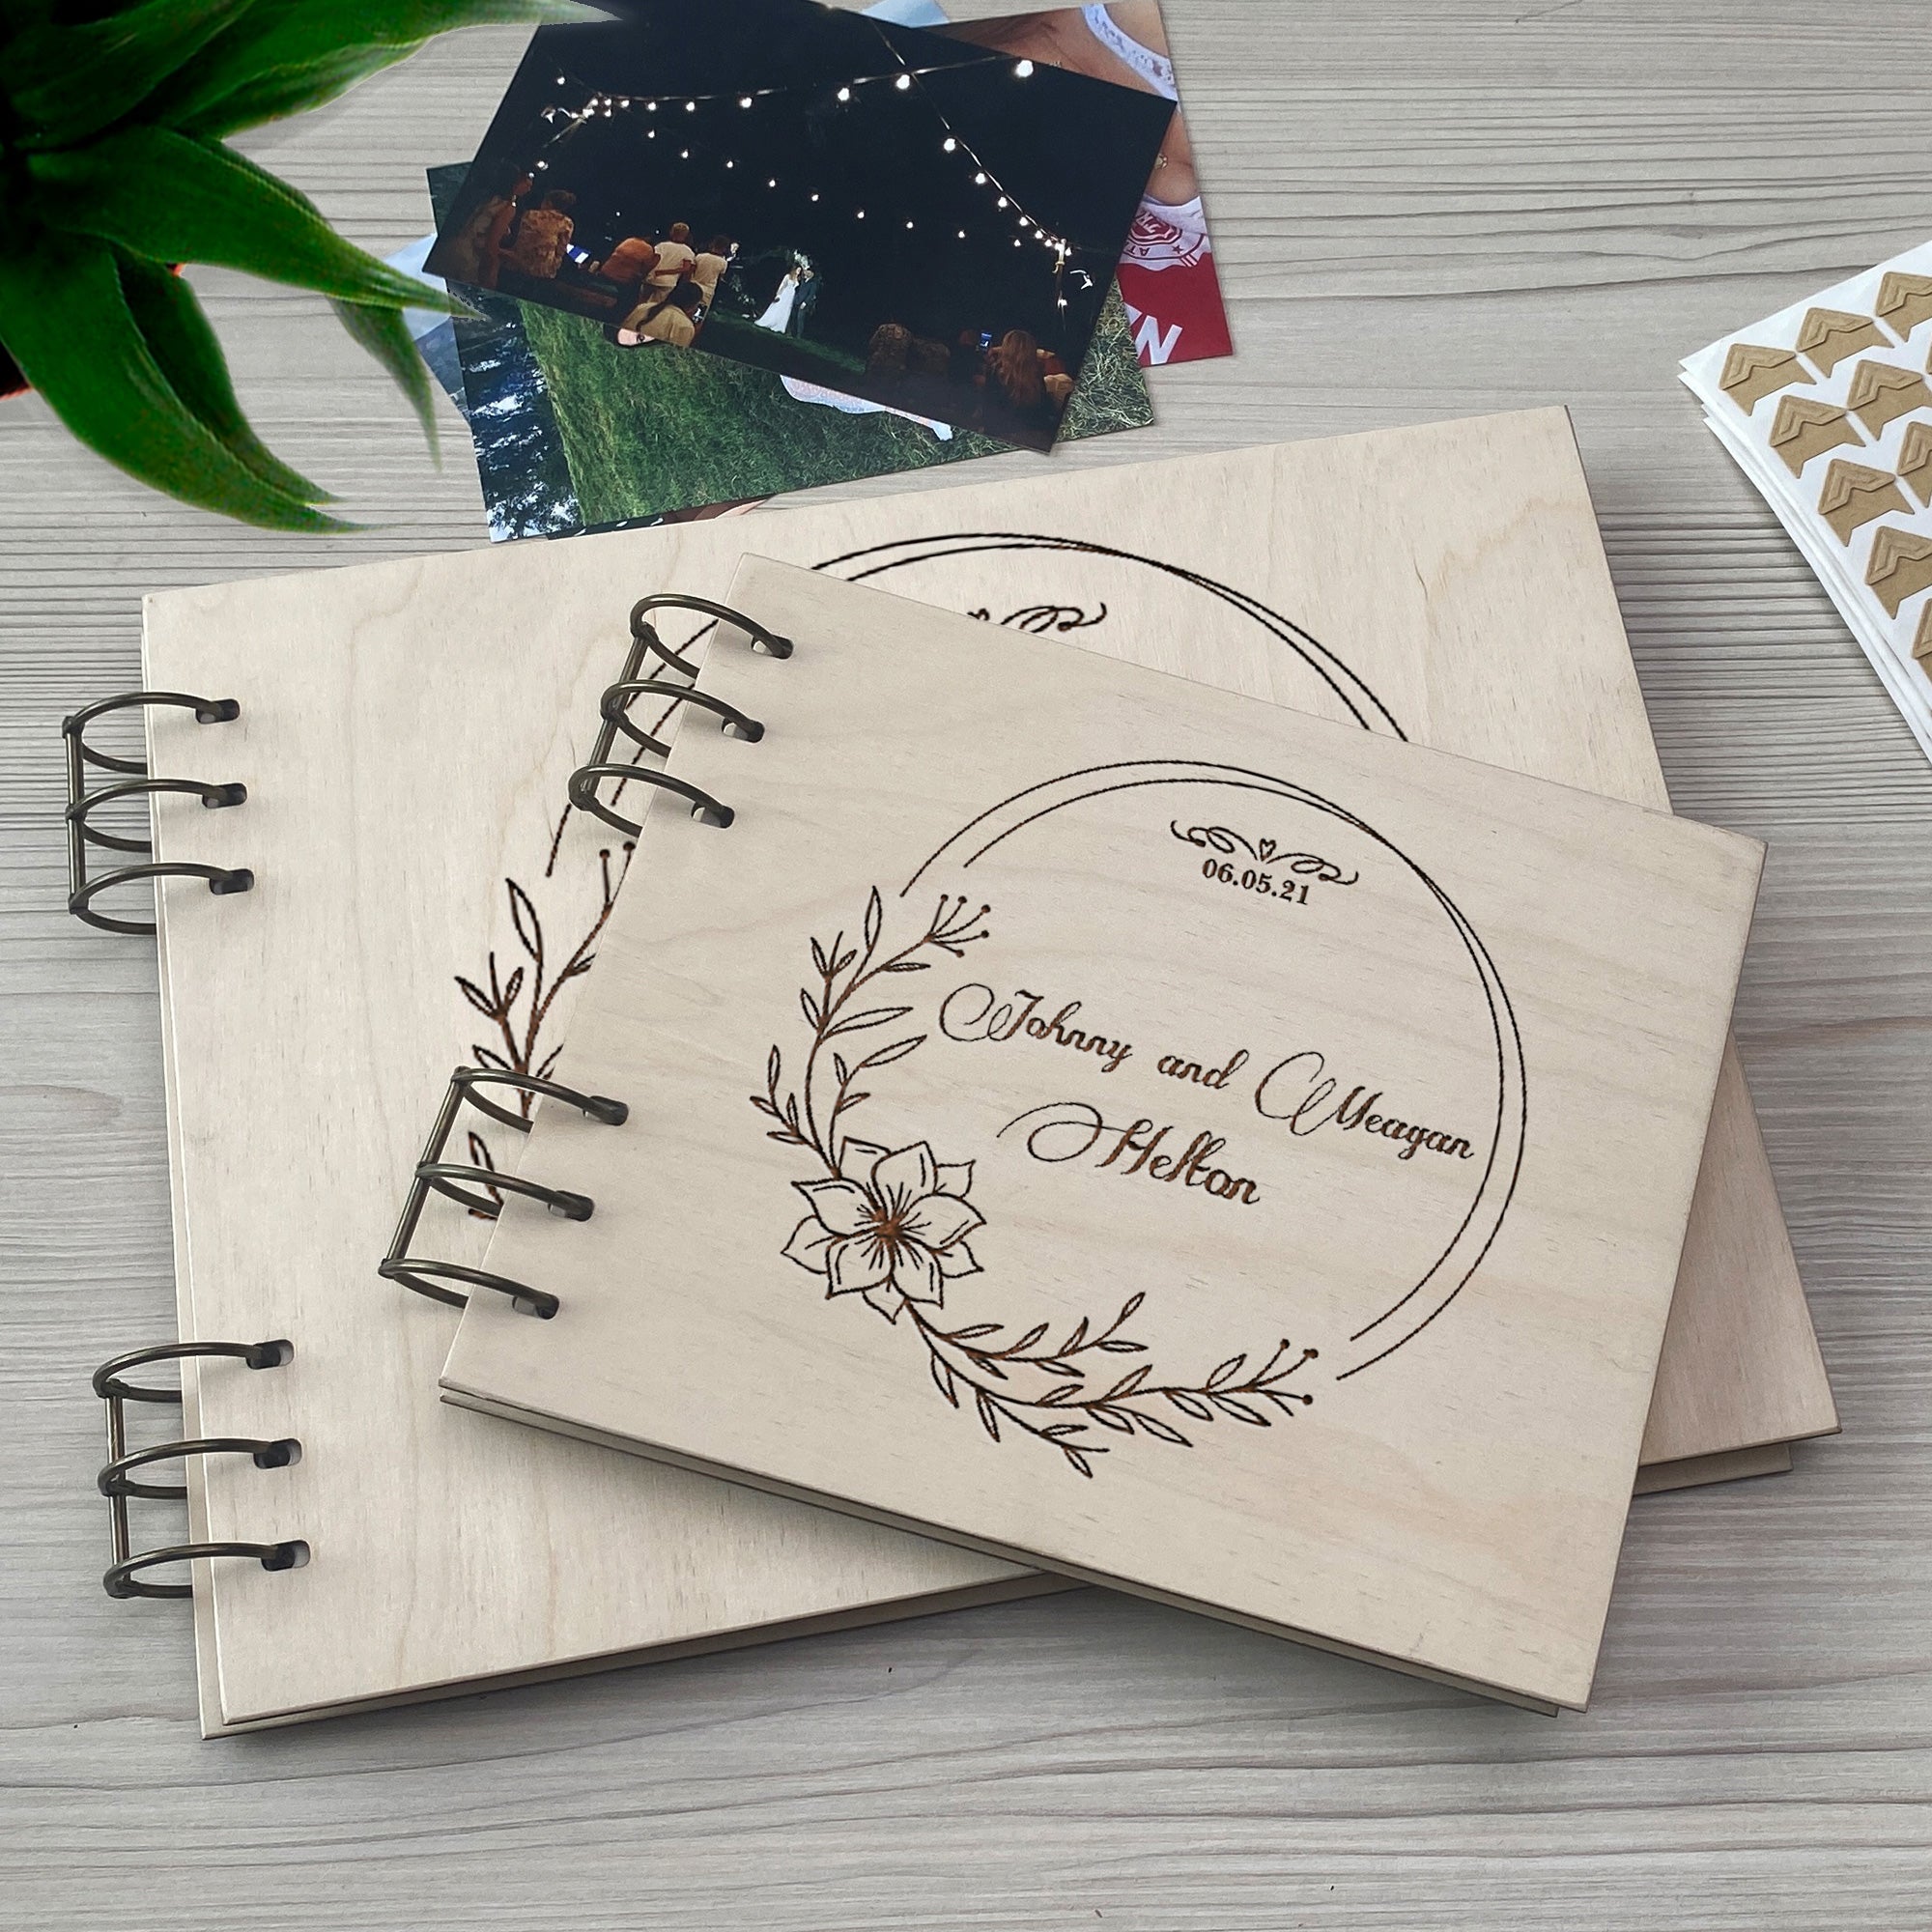 Personalized photo album cover and Flower engraving